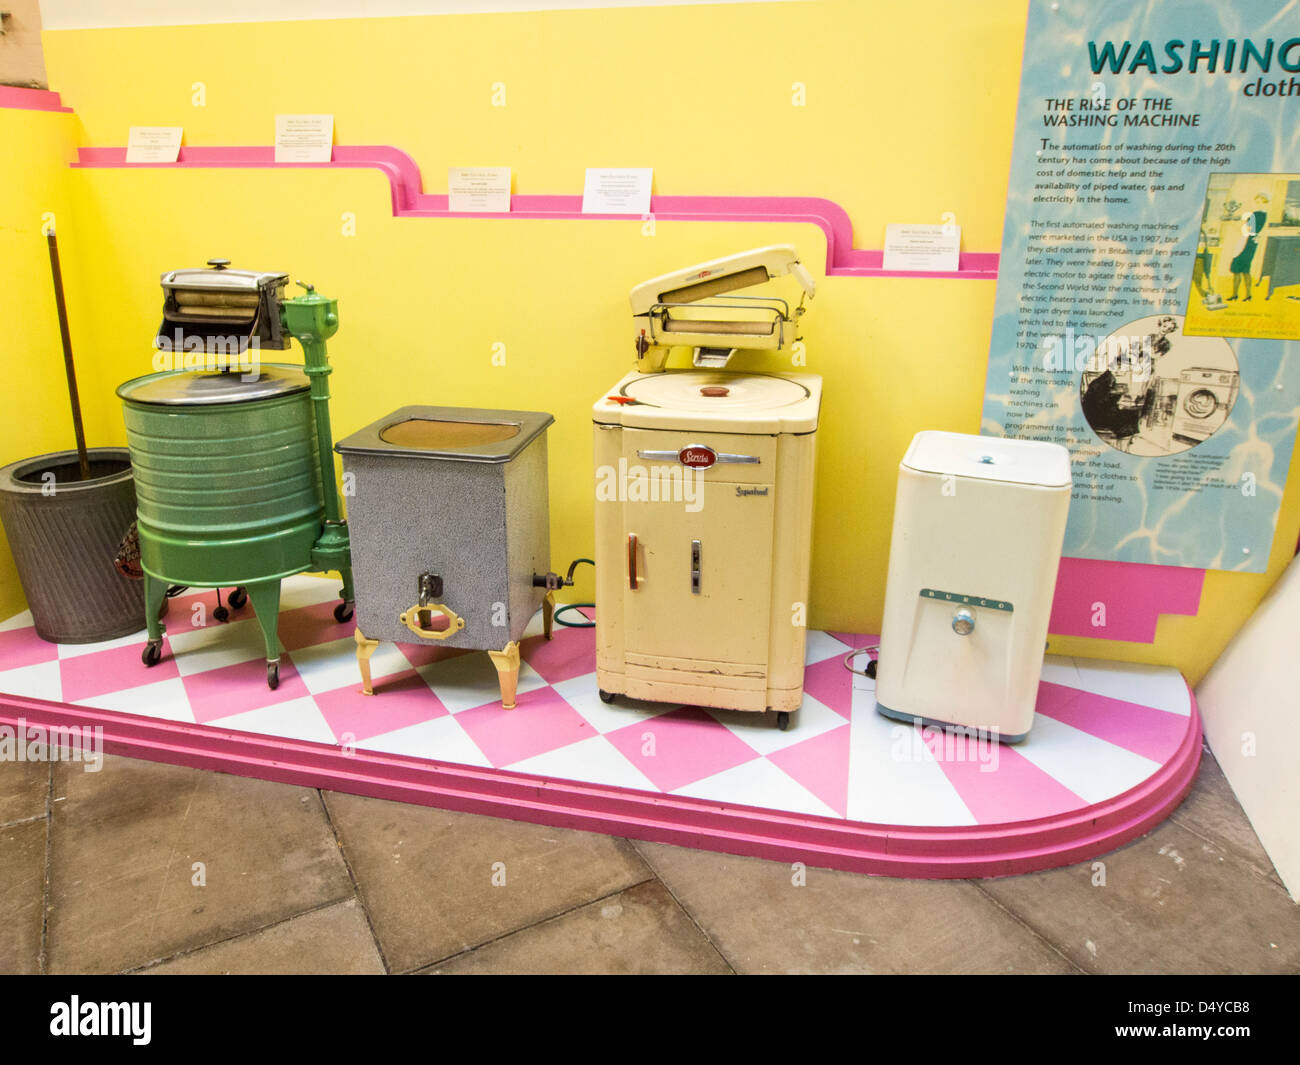 Old washing machines in the old sewage pumping station museum in Leicester, UK. Stock Photo